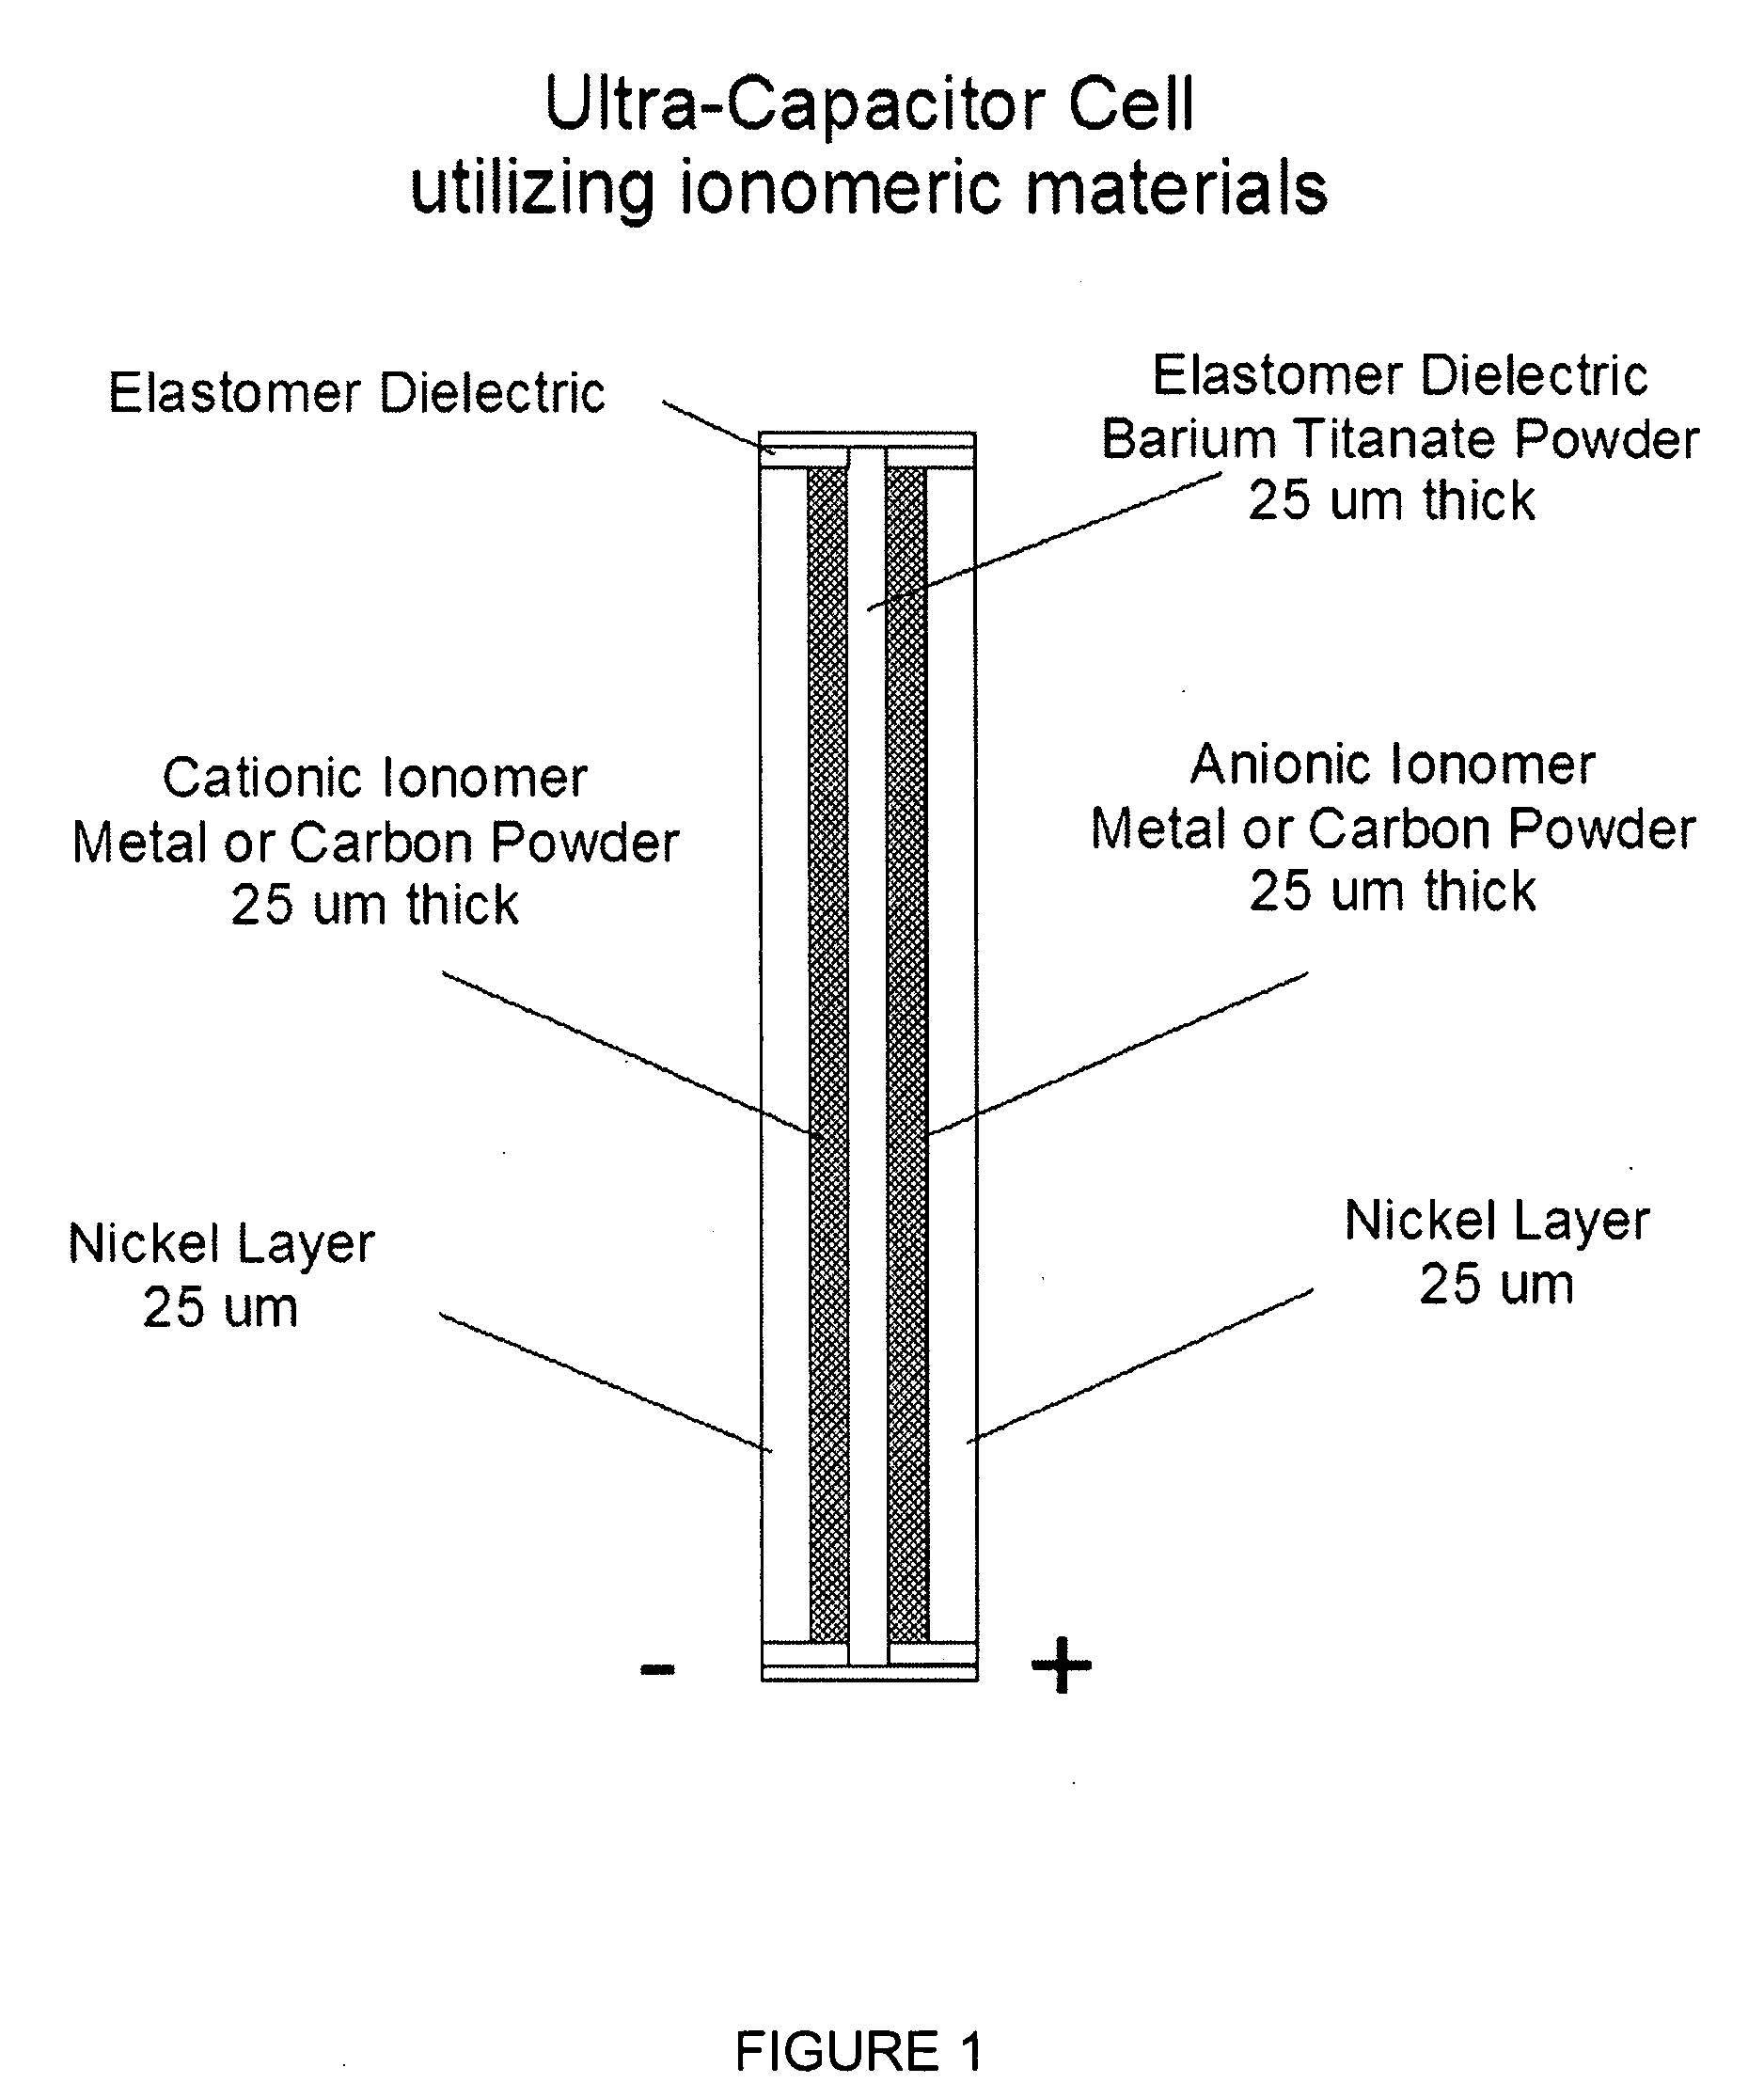 Nanoparticle ultracapacitor